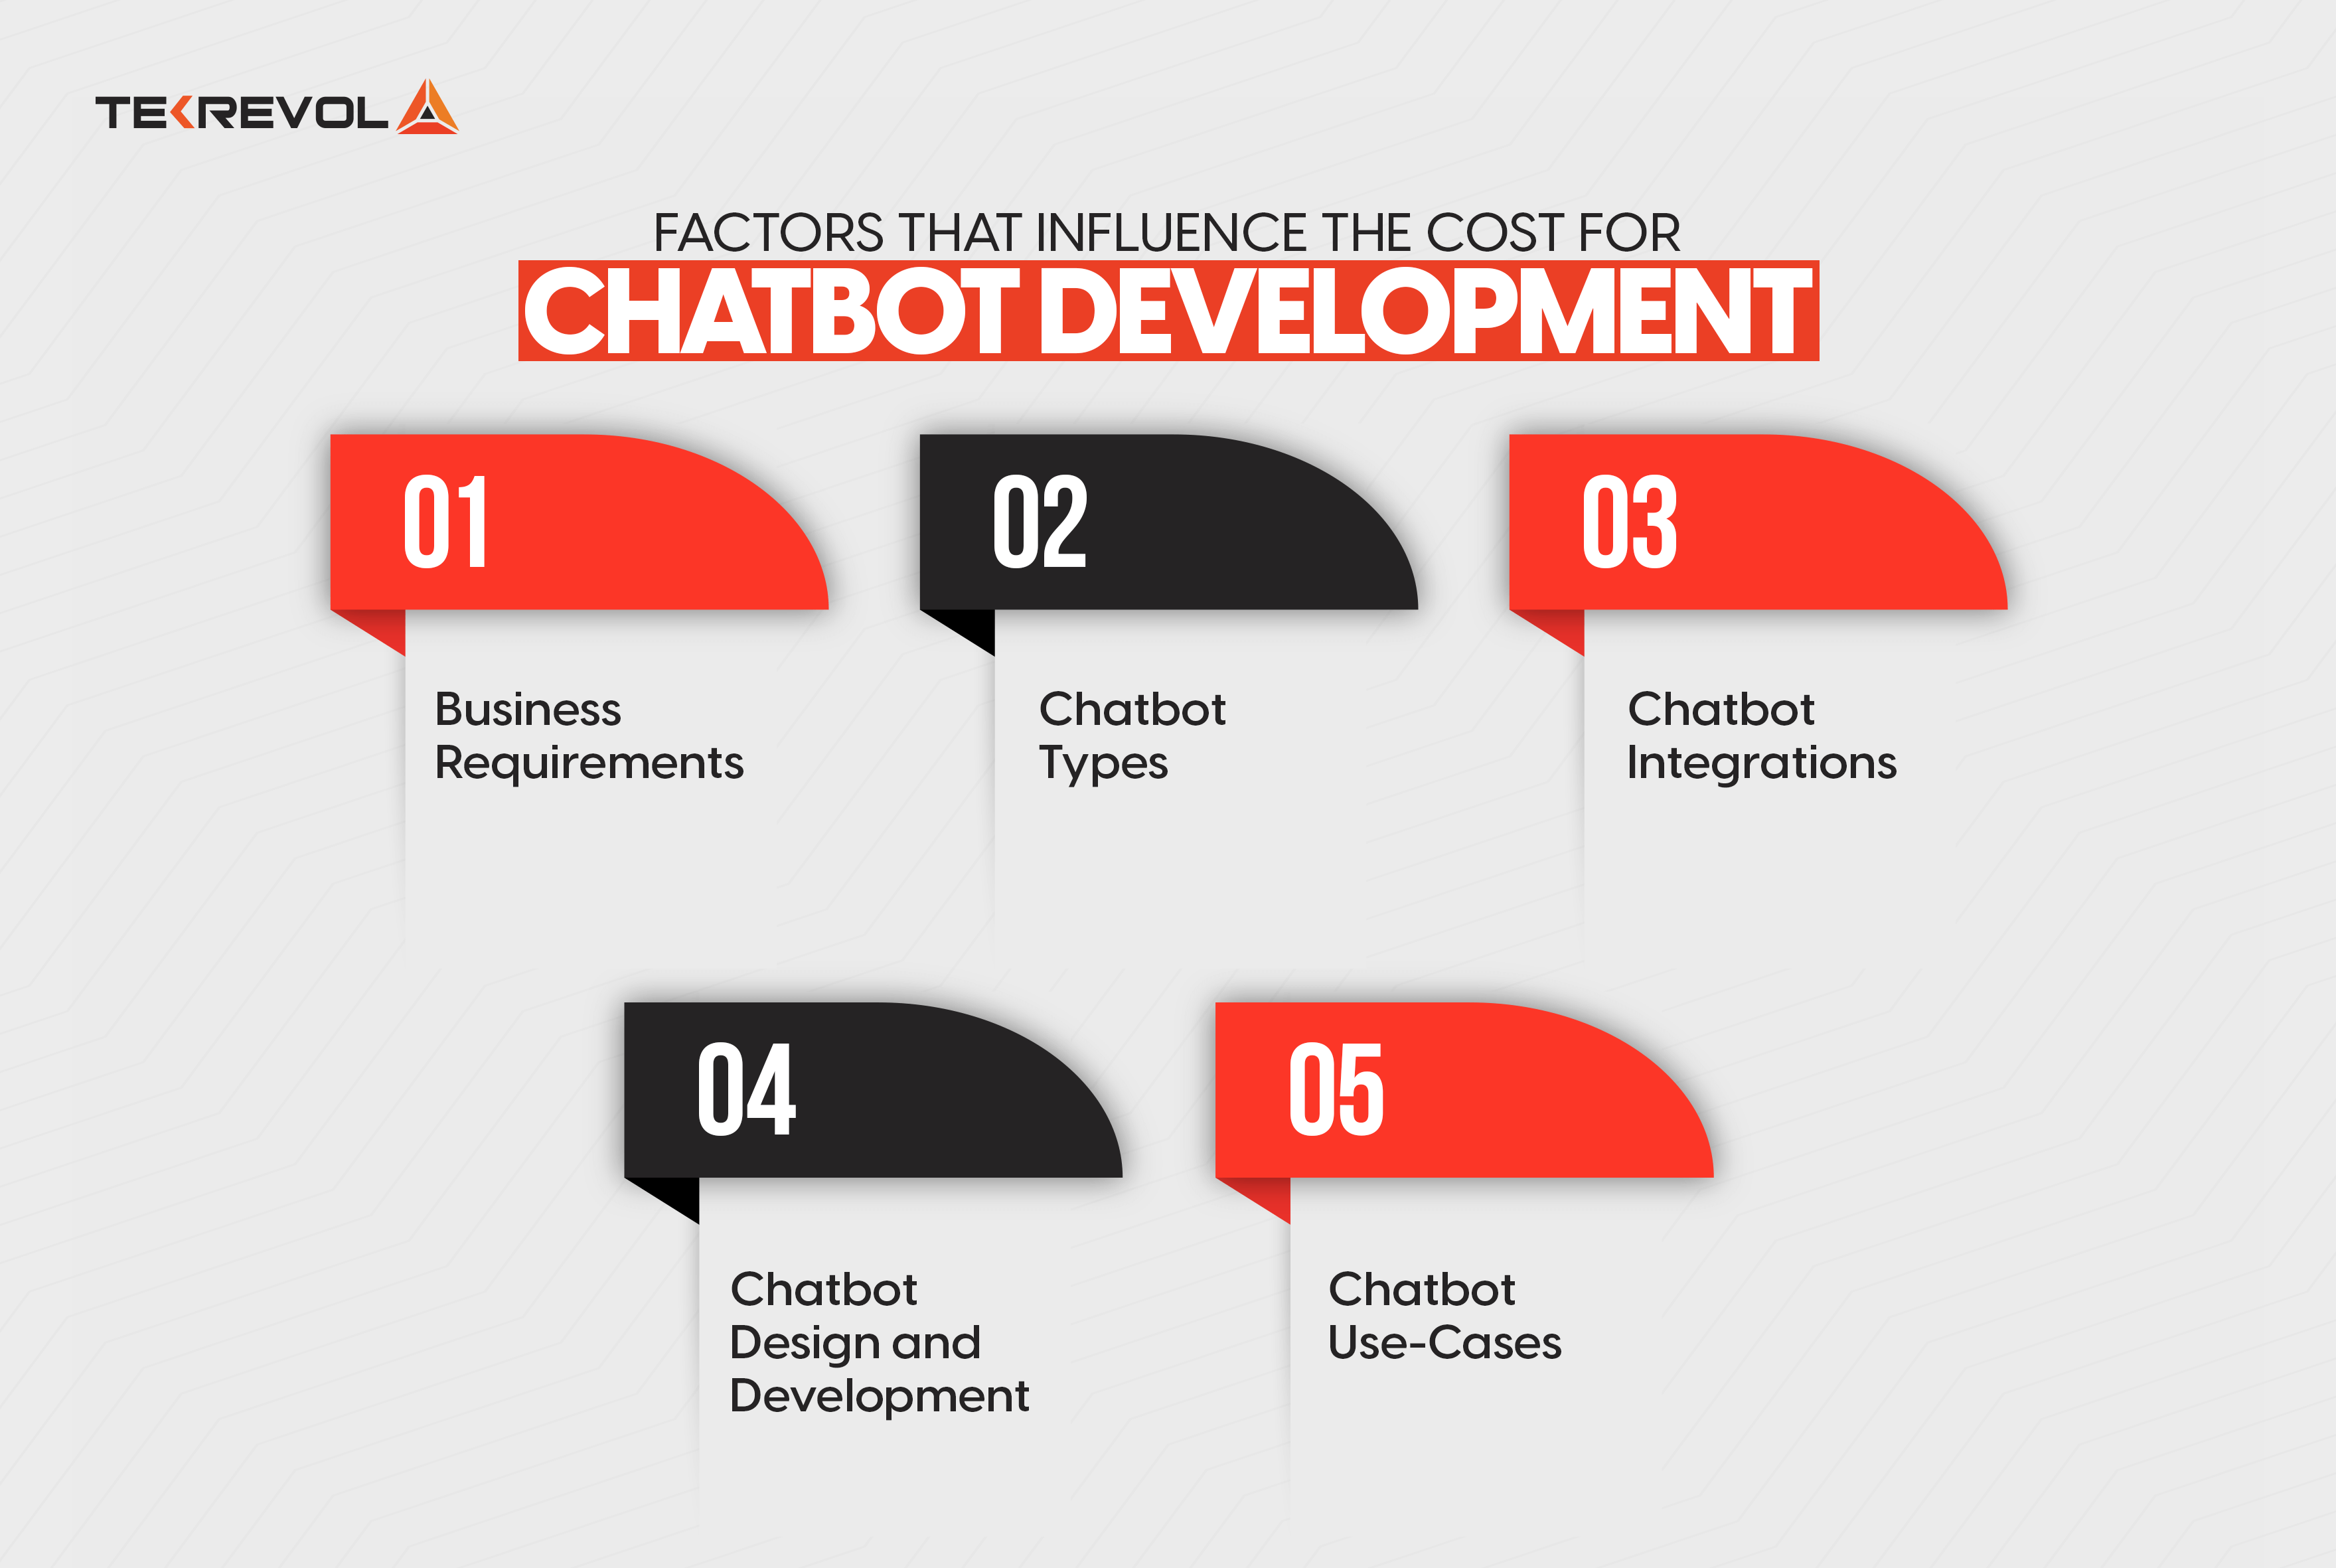 Factors that Influence the Cost for Chatbot Development